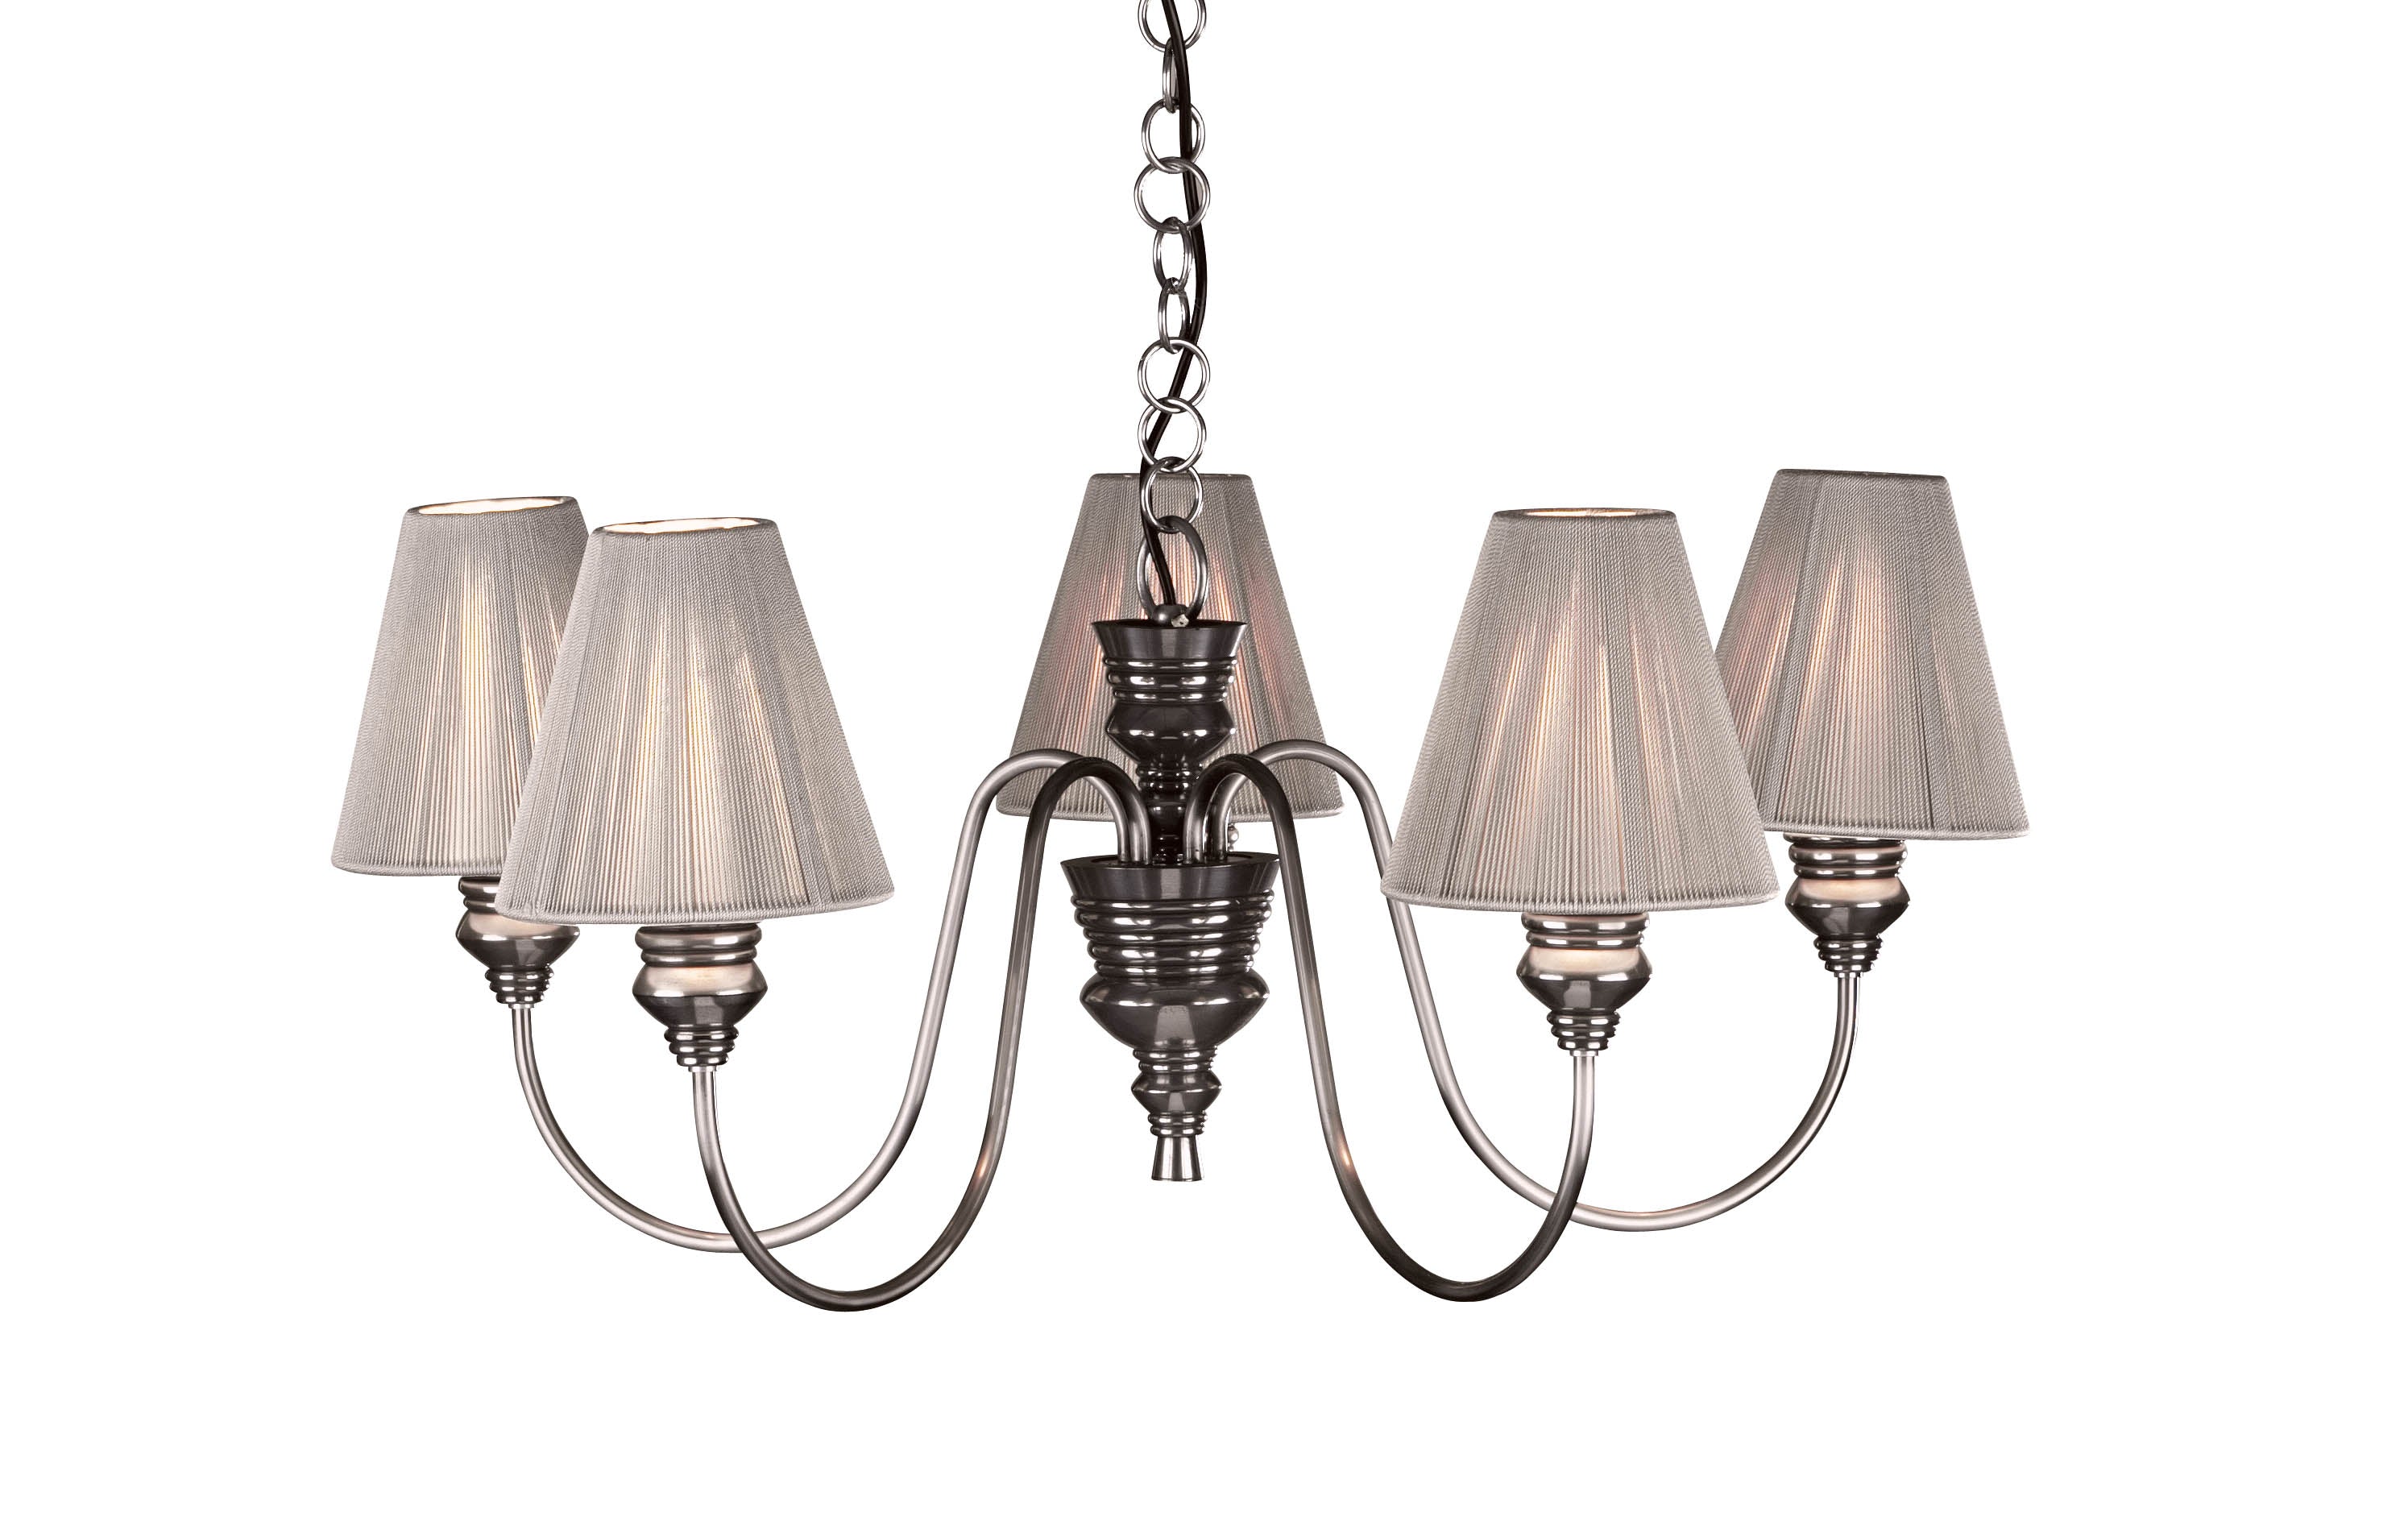 David Hunt Doreen 5 Light Multi-Arm Pendant Pewter/Bespoke & Polished Pewter Complete With String Shades